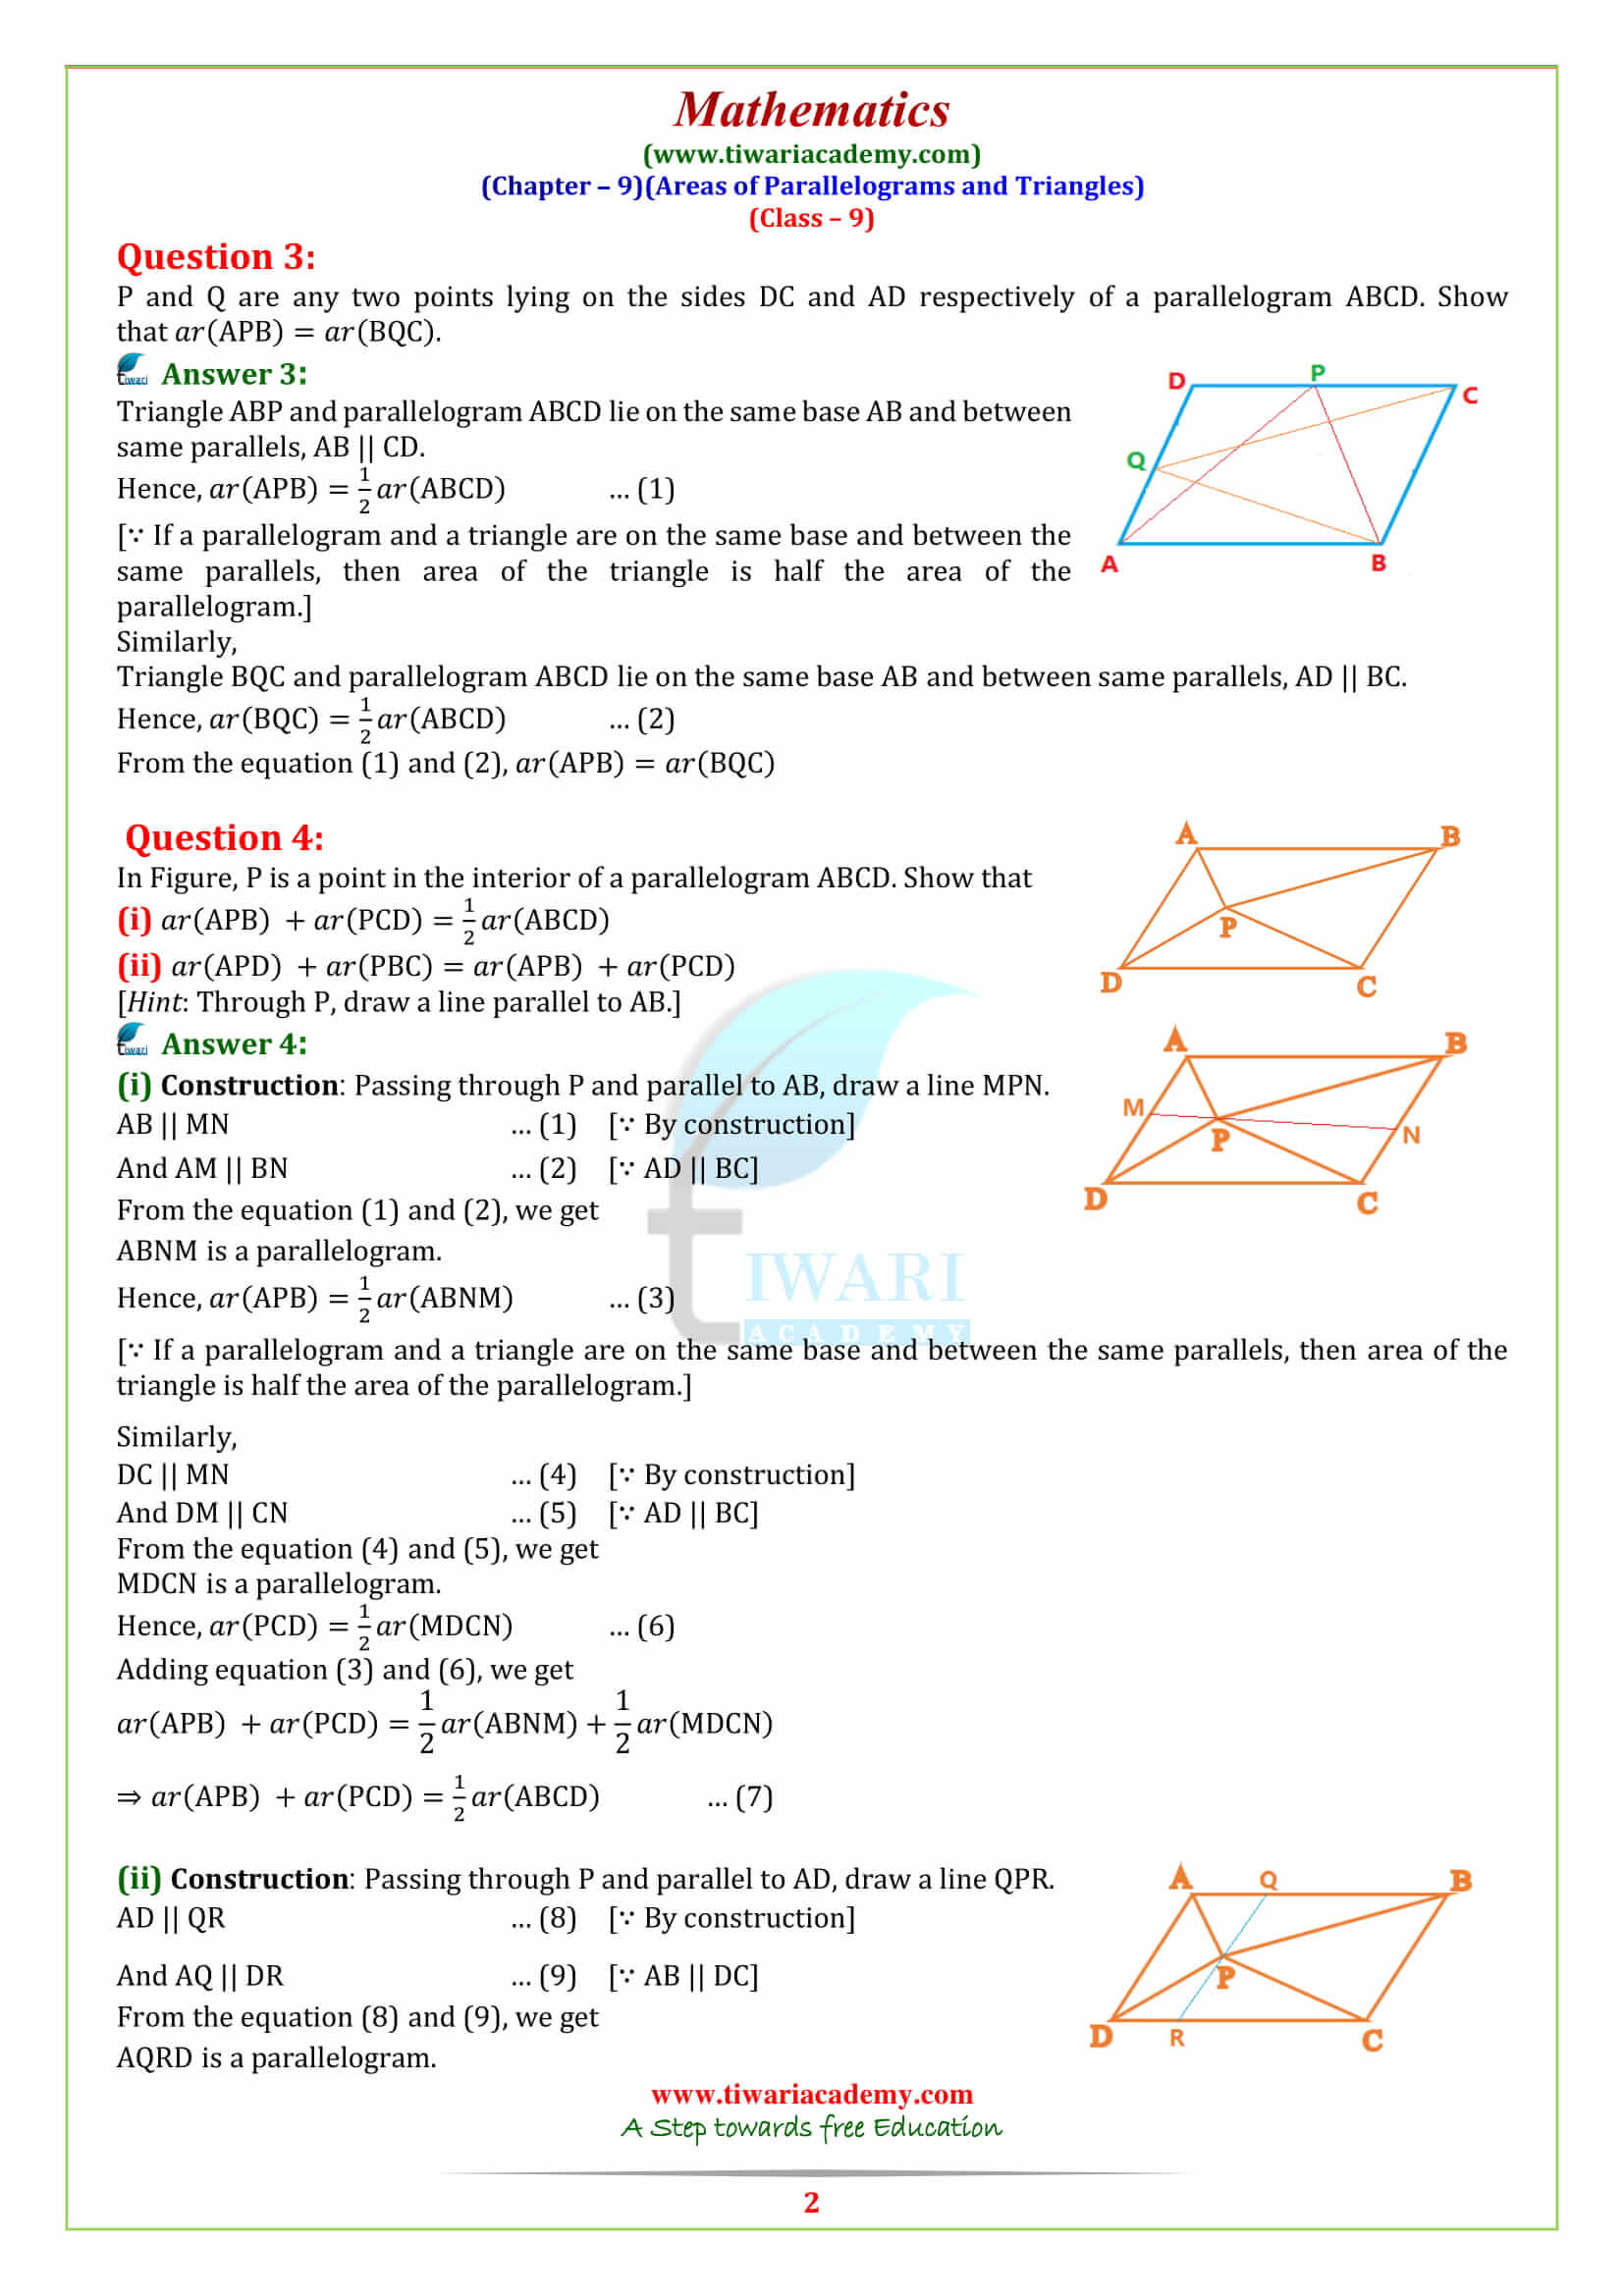 NCERT Solutions for Class 9 Maths Chapter 9 Areas of Parallelograms and Triangles Exercise 9.2 in pdf form free